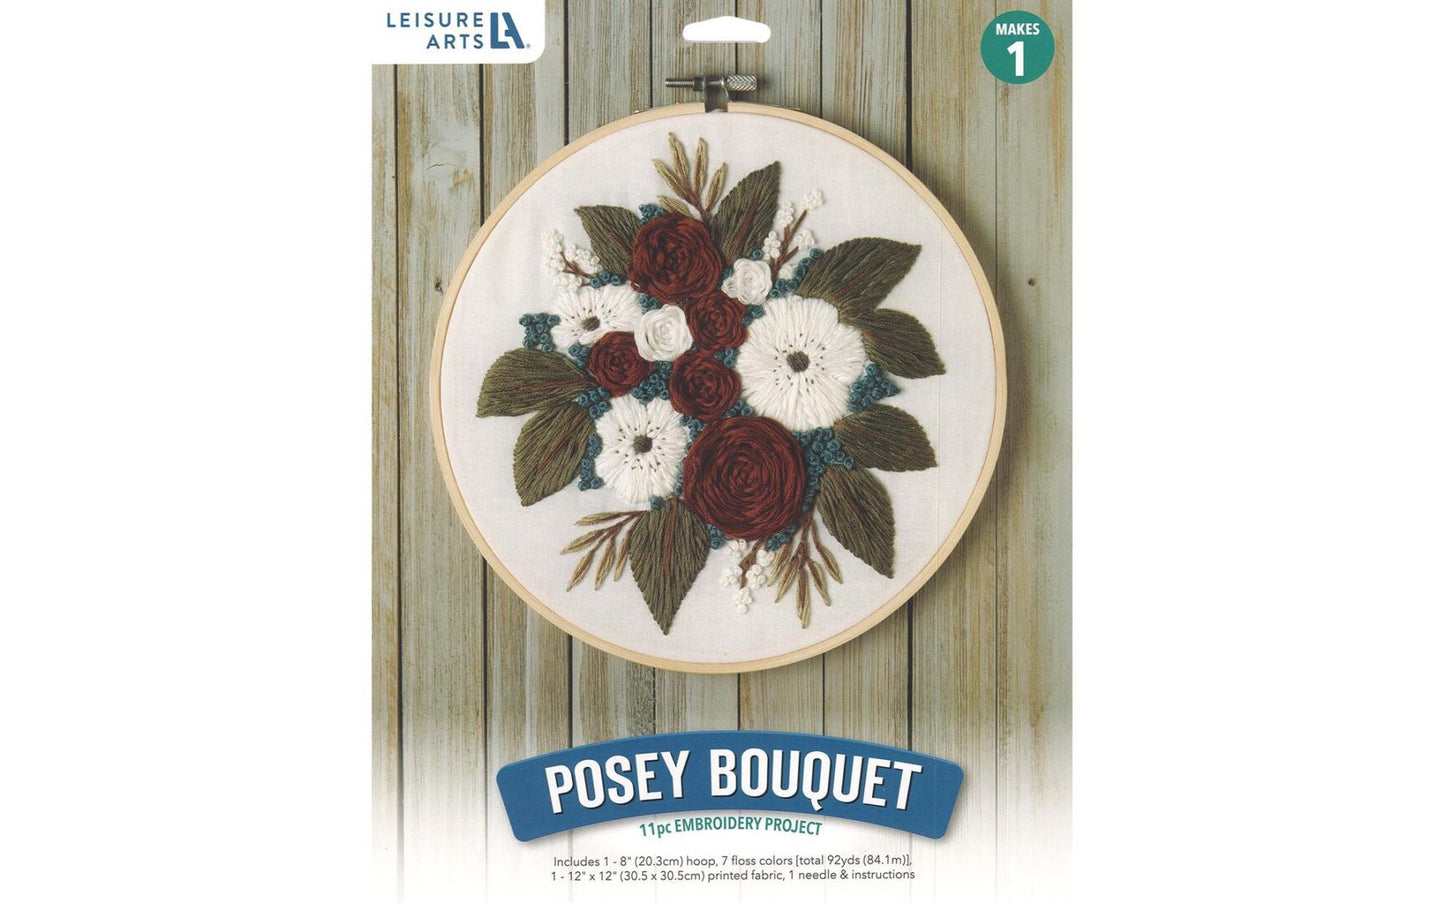 Leisure Arts Kit Mini Maker Embroidery 8" Posey Bouquet